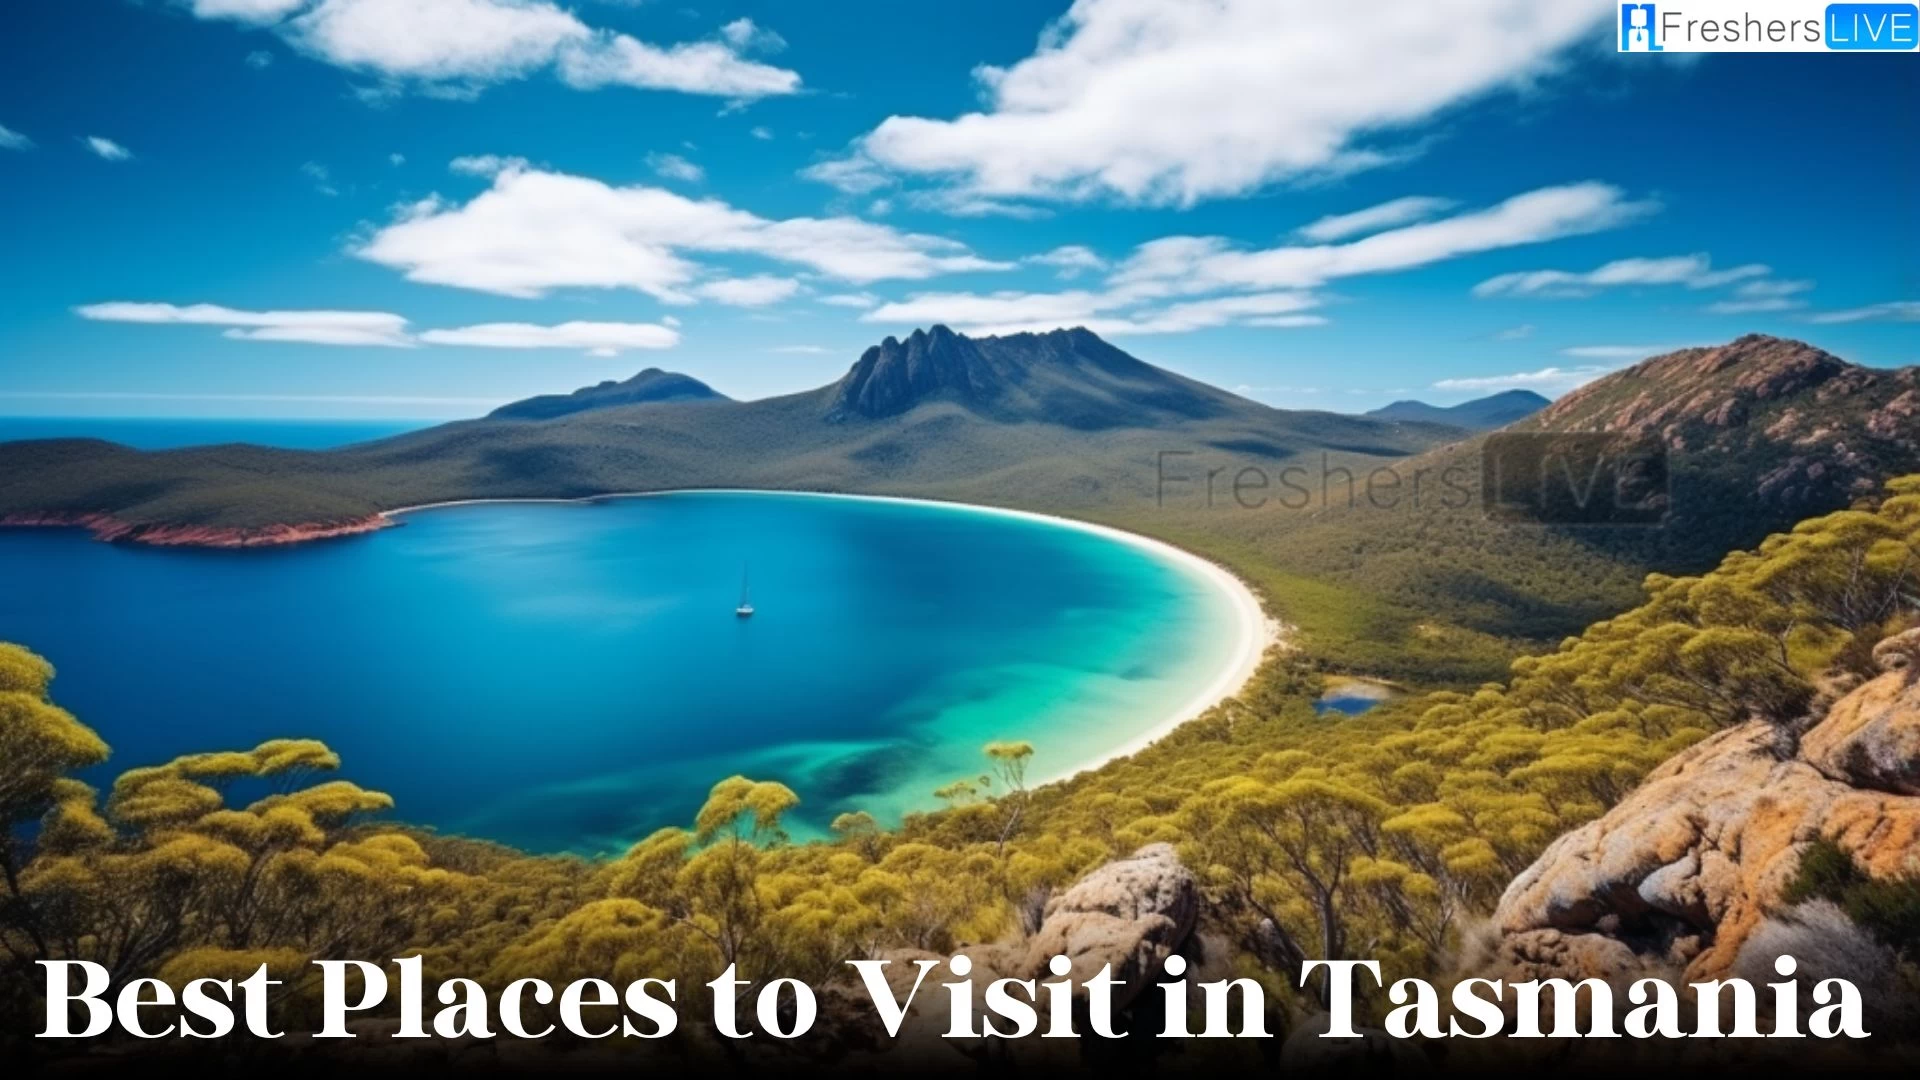 Best Places to Visit in Tasmania - Top 10 Places for an Adventurous Trip